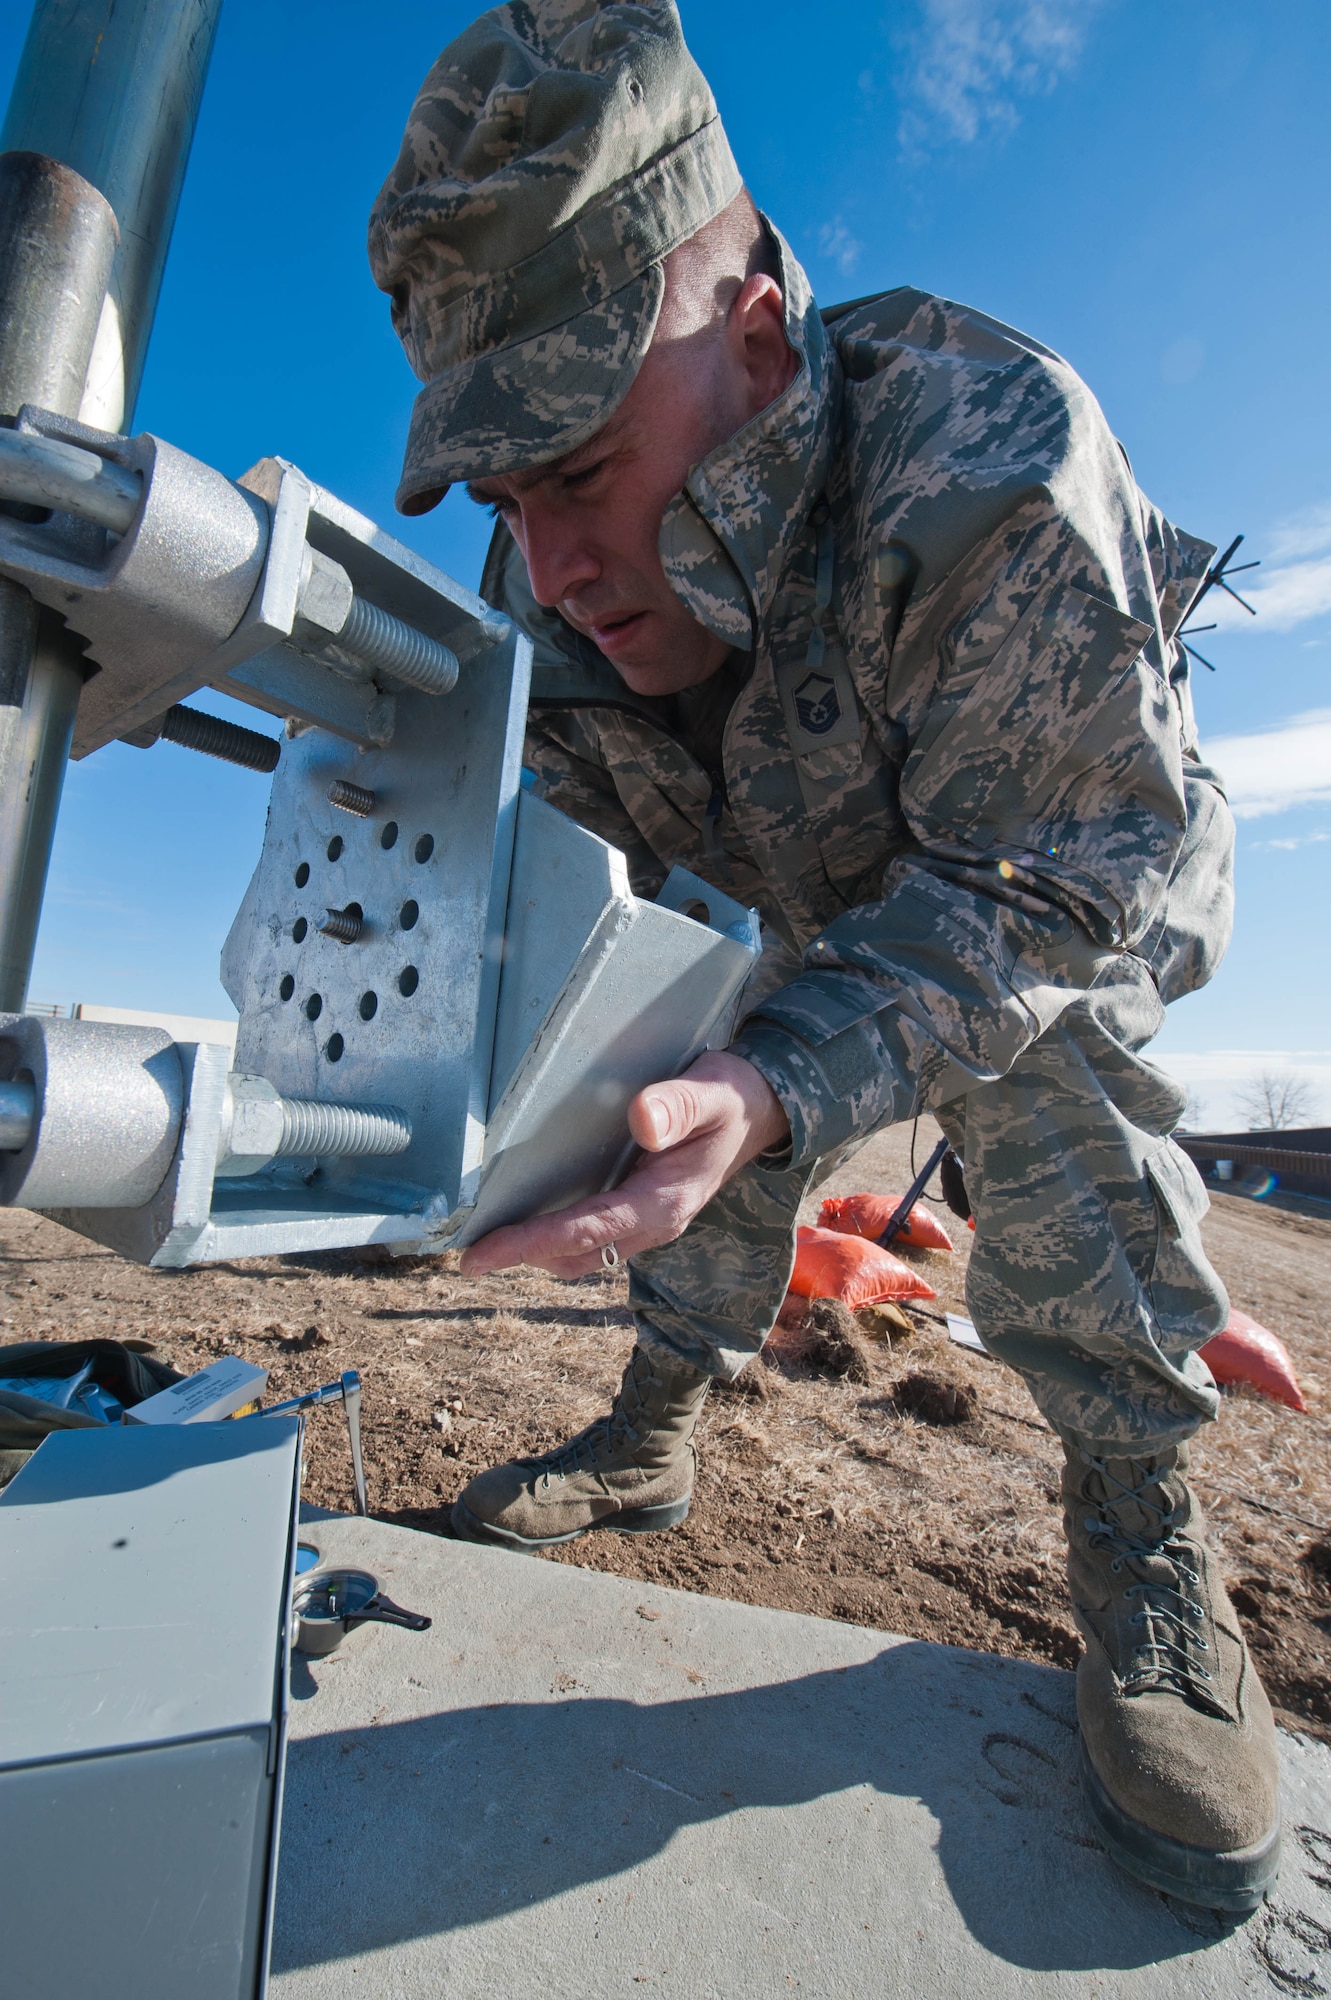 Master Sgt. James Shearer, 28th Communications Squadron transmission system radio maintainer, assembles a AM-1 mount to correctly angle a new helical antenna being installed on Ellsworth Air Force Base, S.D., Feb. 13, 2012. The new antenna is capable of receiving satellite signals to allow continuous, secure data to be sent between military installations thousands of miles away. (U.S. Air Force photo by Airman 1st Class Zachary Hada/Released)